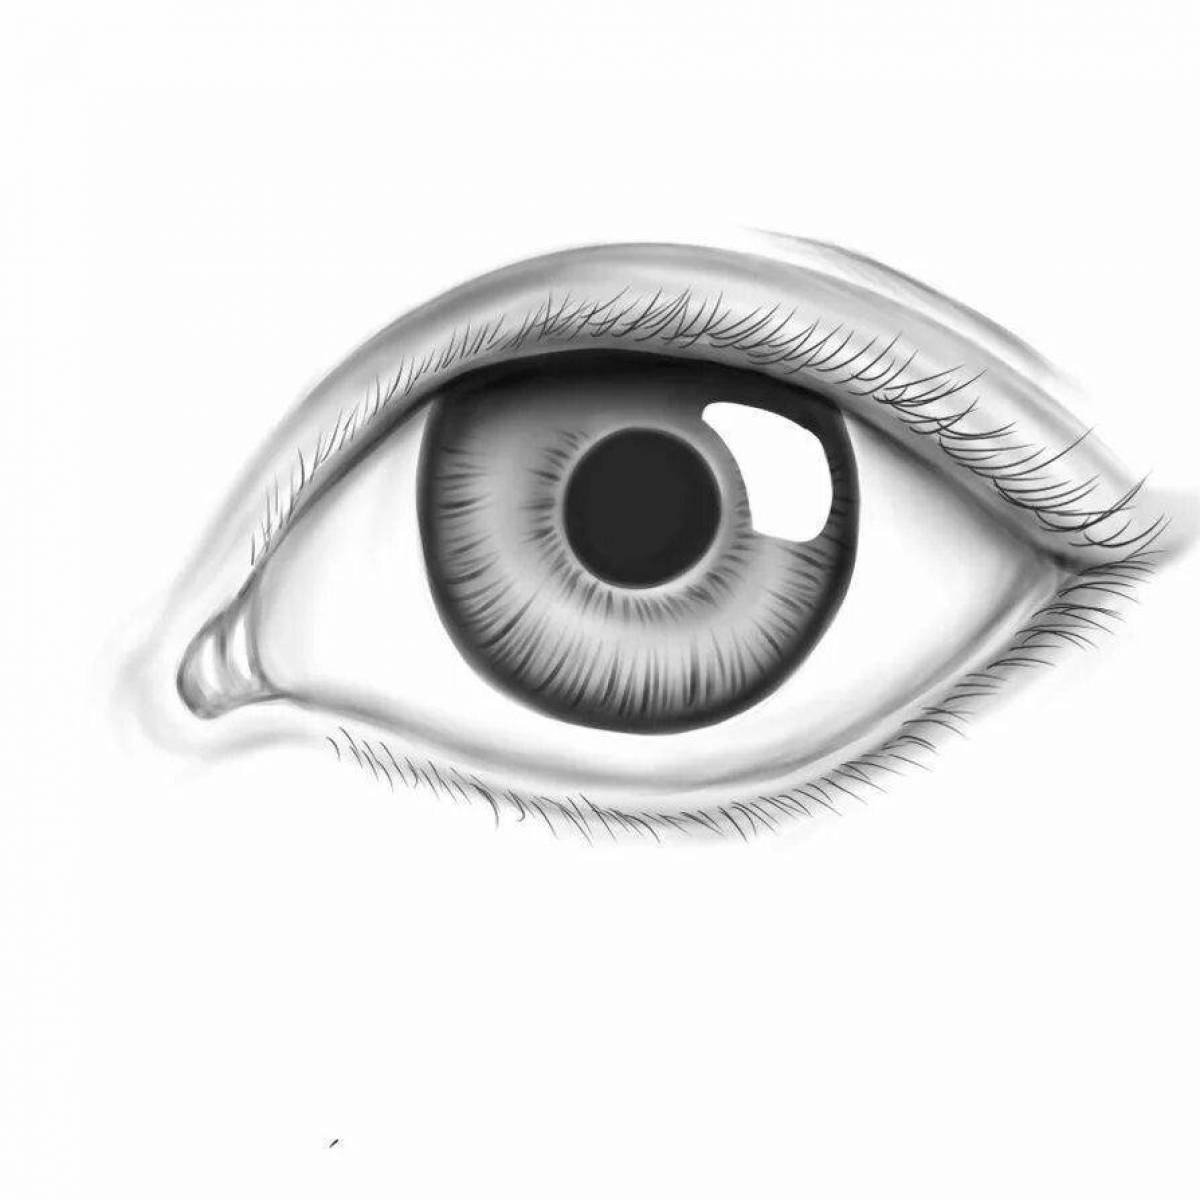 Coloring page of the human eye for vision training